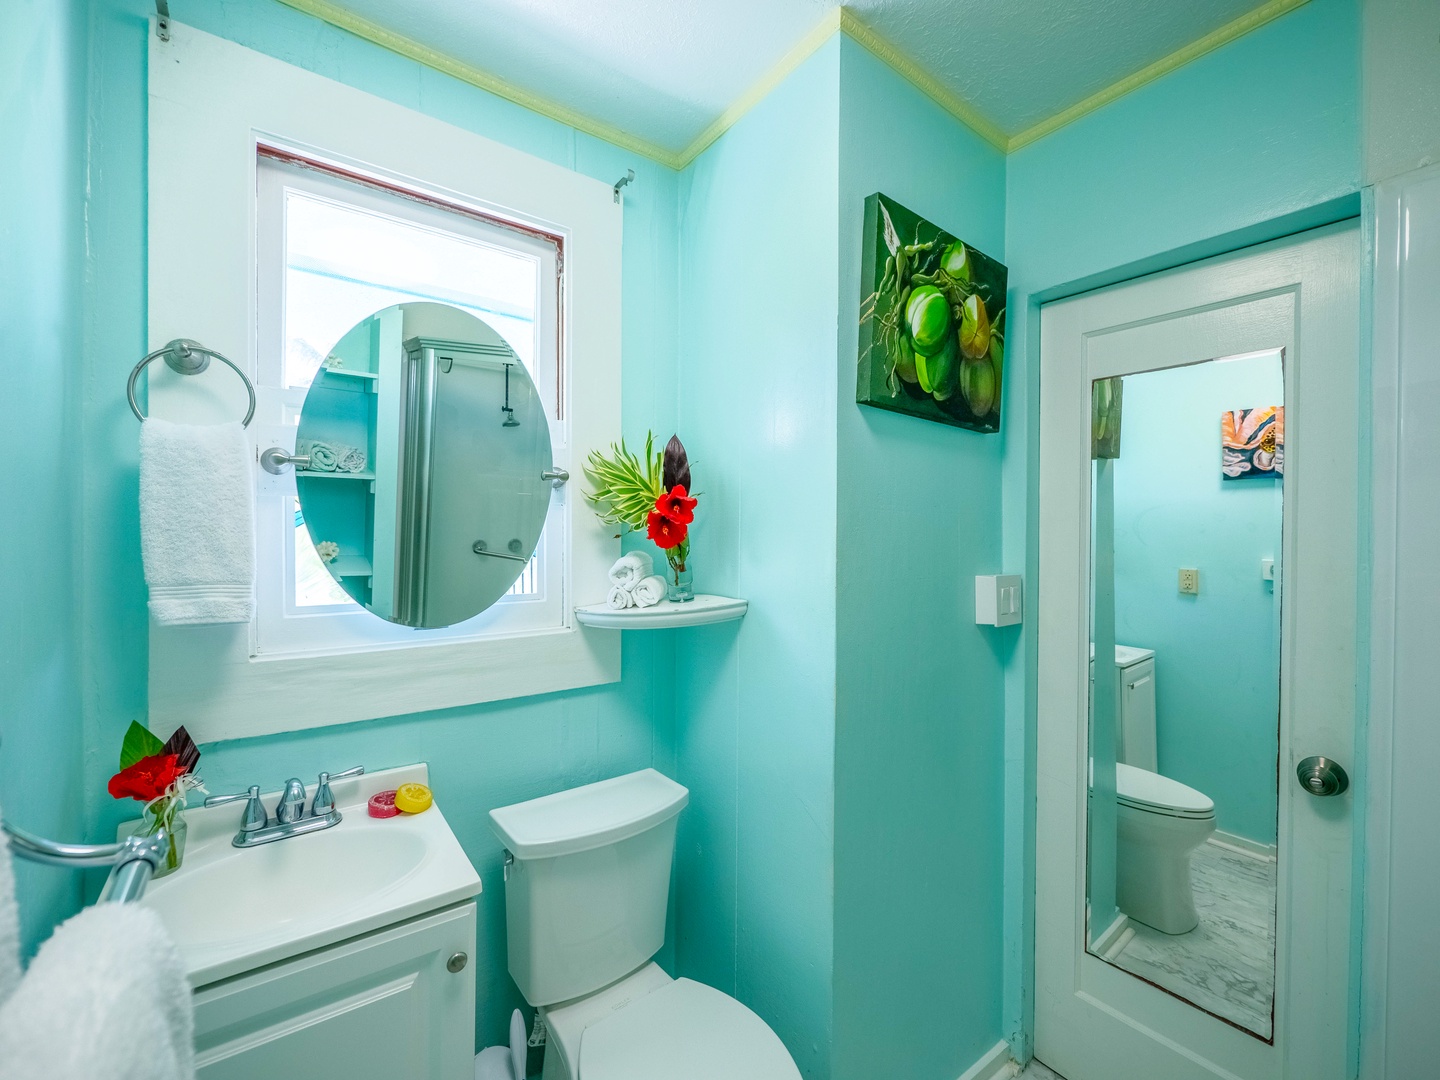 Hauula Vacation Rentals, Paradise Reef Retreat - Common bathroom of the home with a single sink